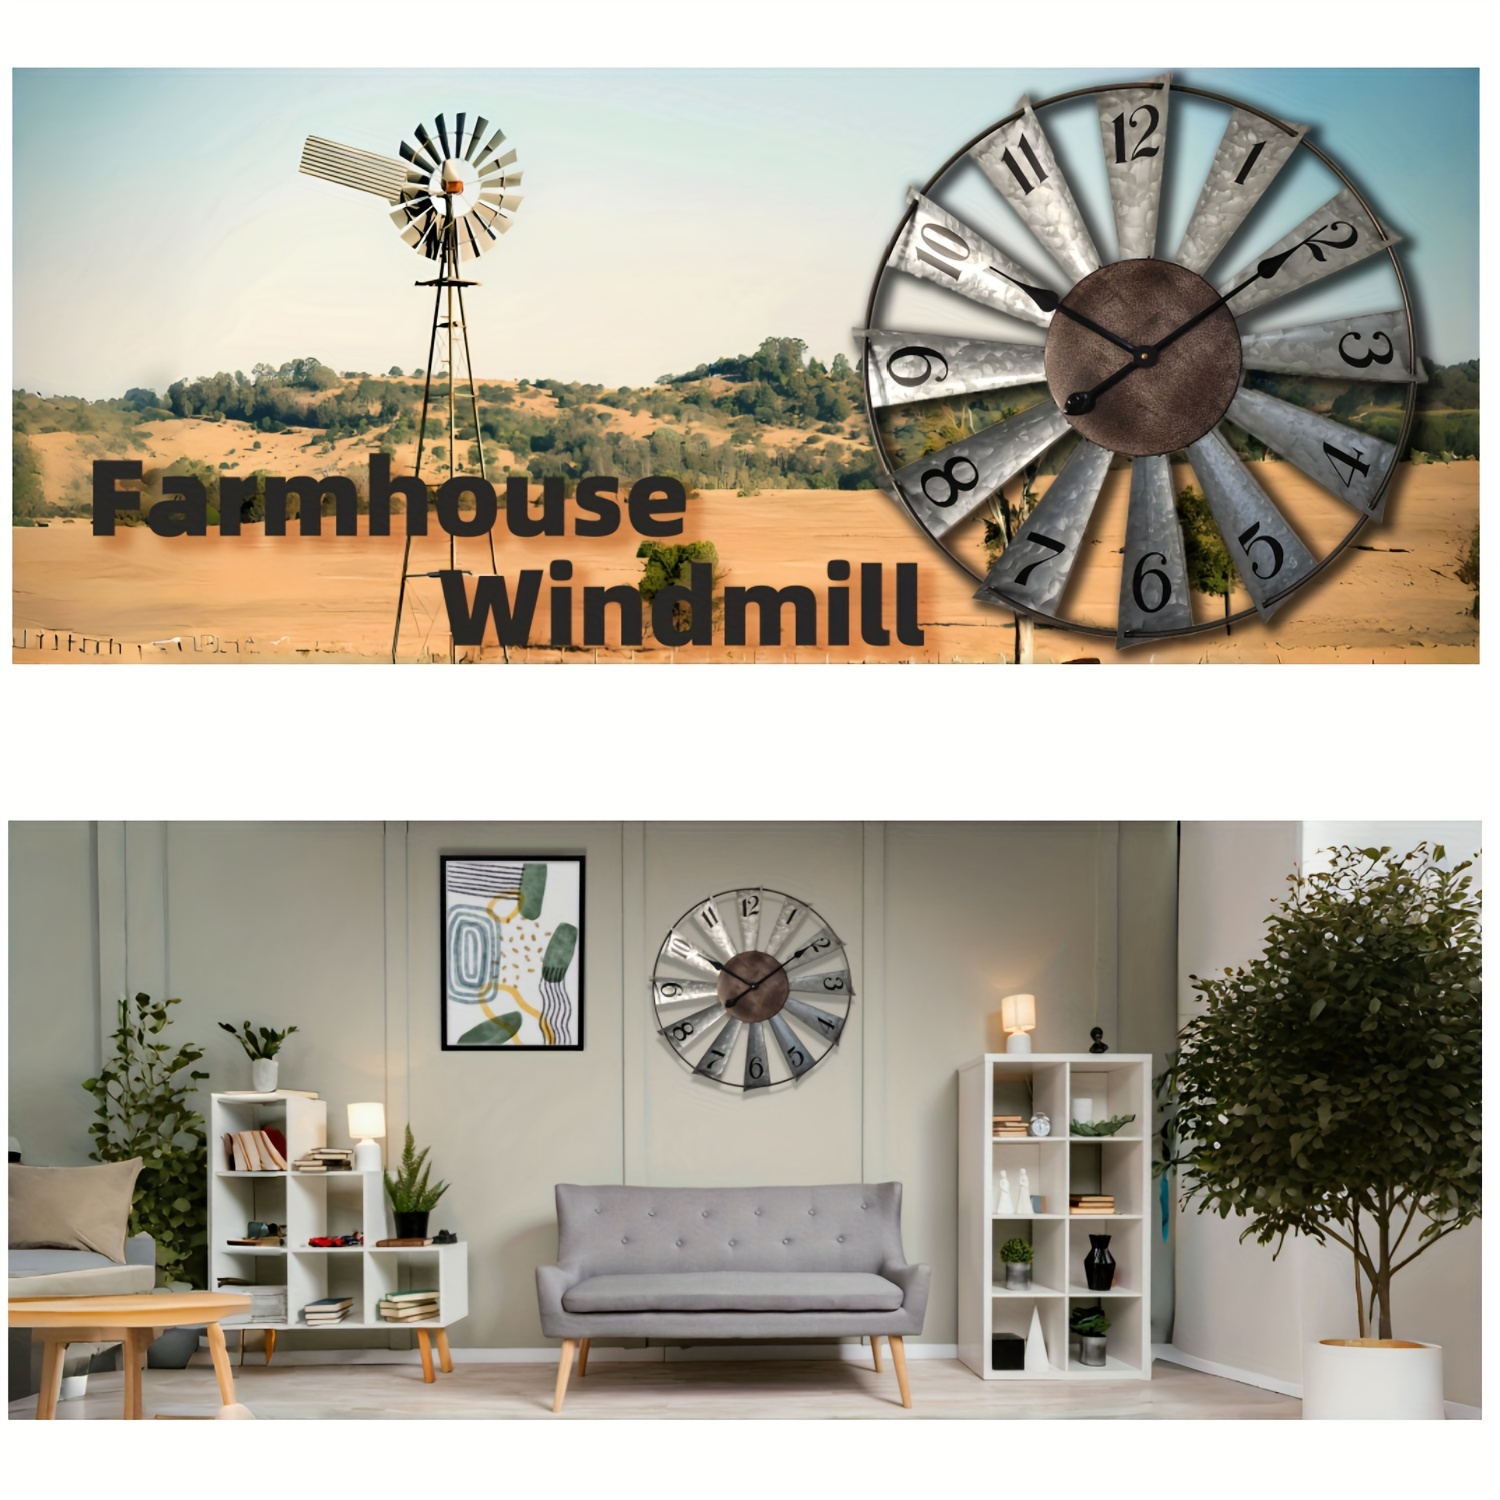 

24 Inch Large Windmill Wall Hanging Farmhouse Decor Clock Oversized Metal Clock Galvanized Windmill Analog Clocks For Living Room Kitchen Dining Room Bedroom, Silent, Battery Operated